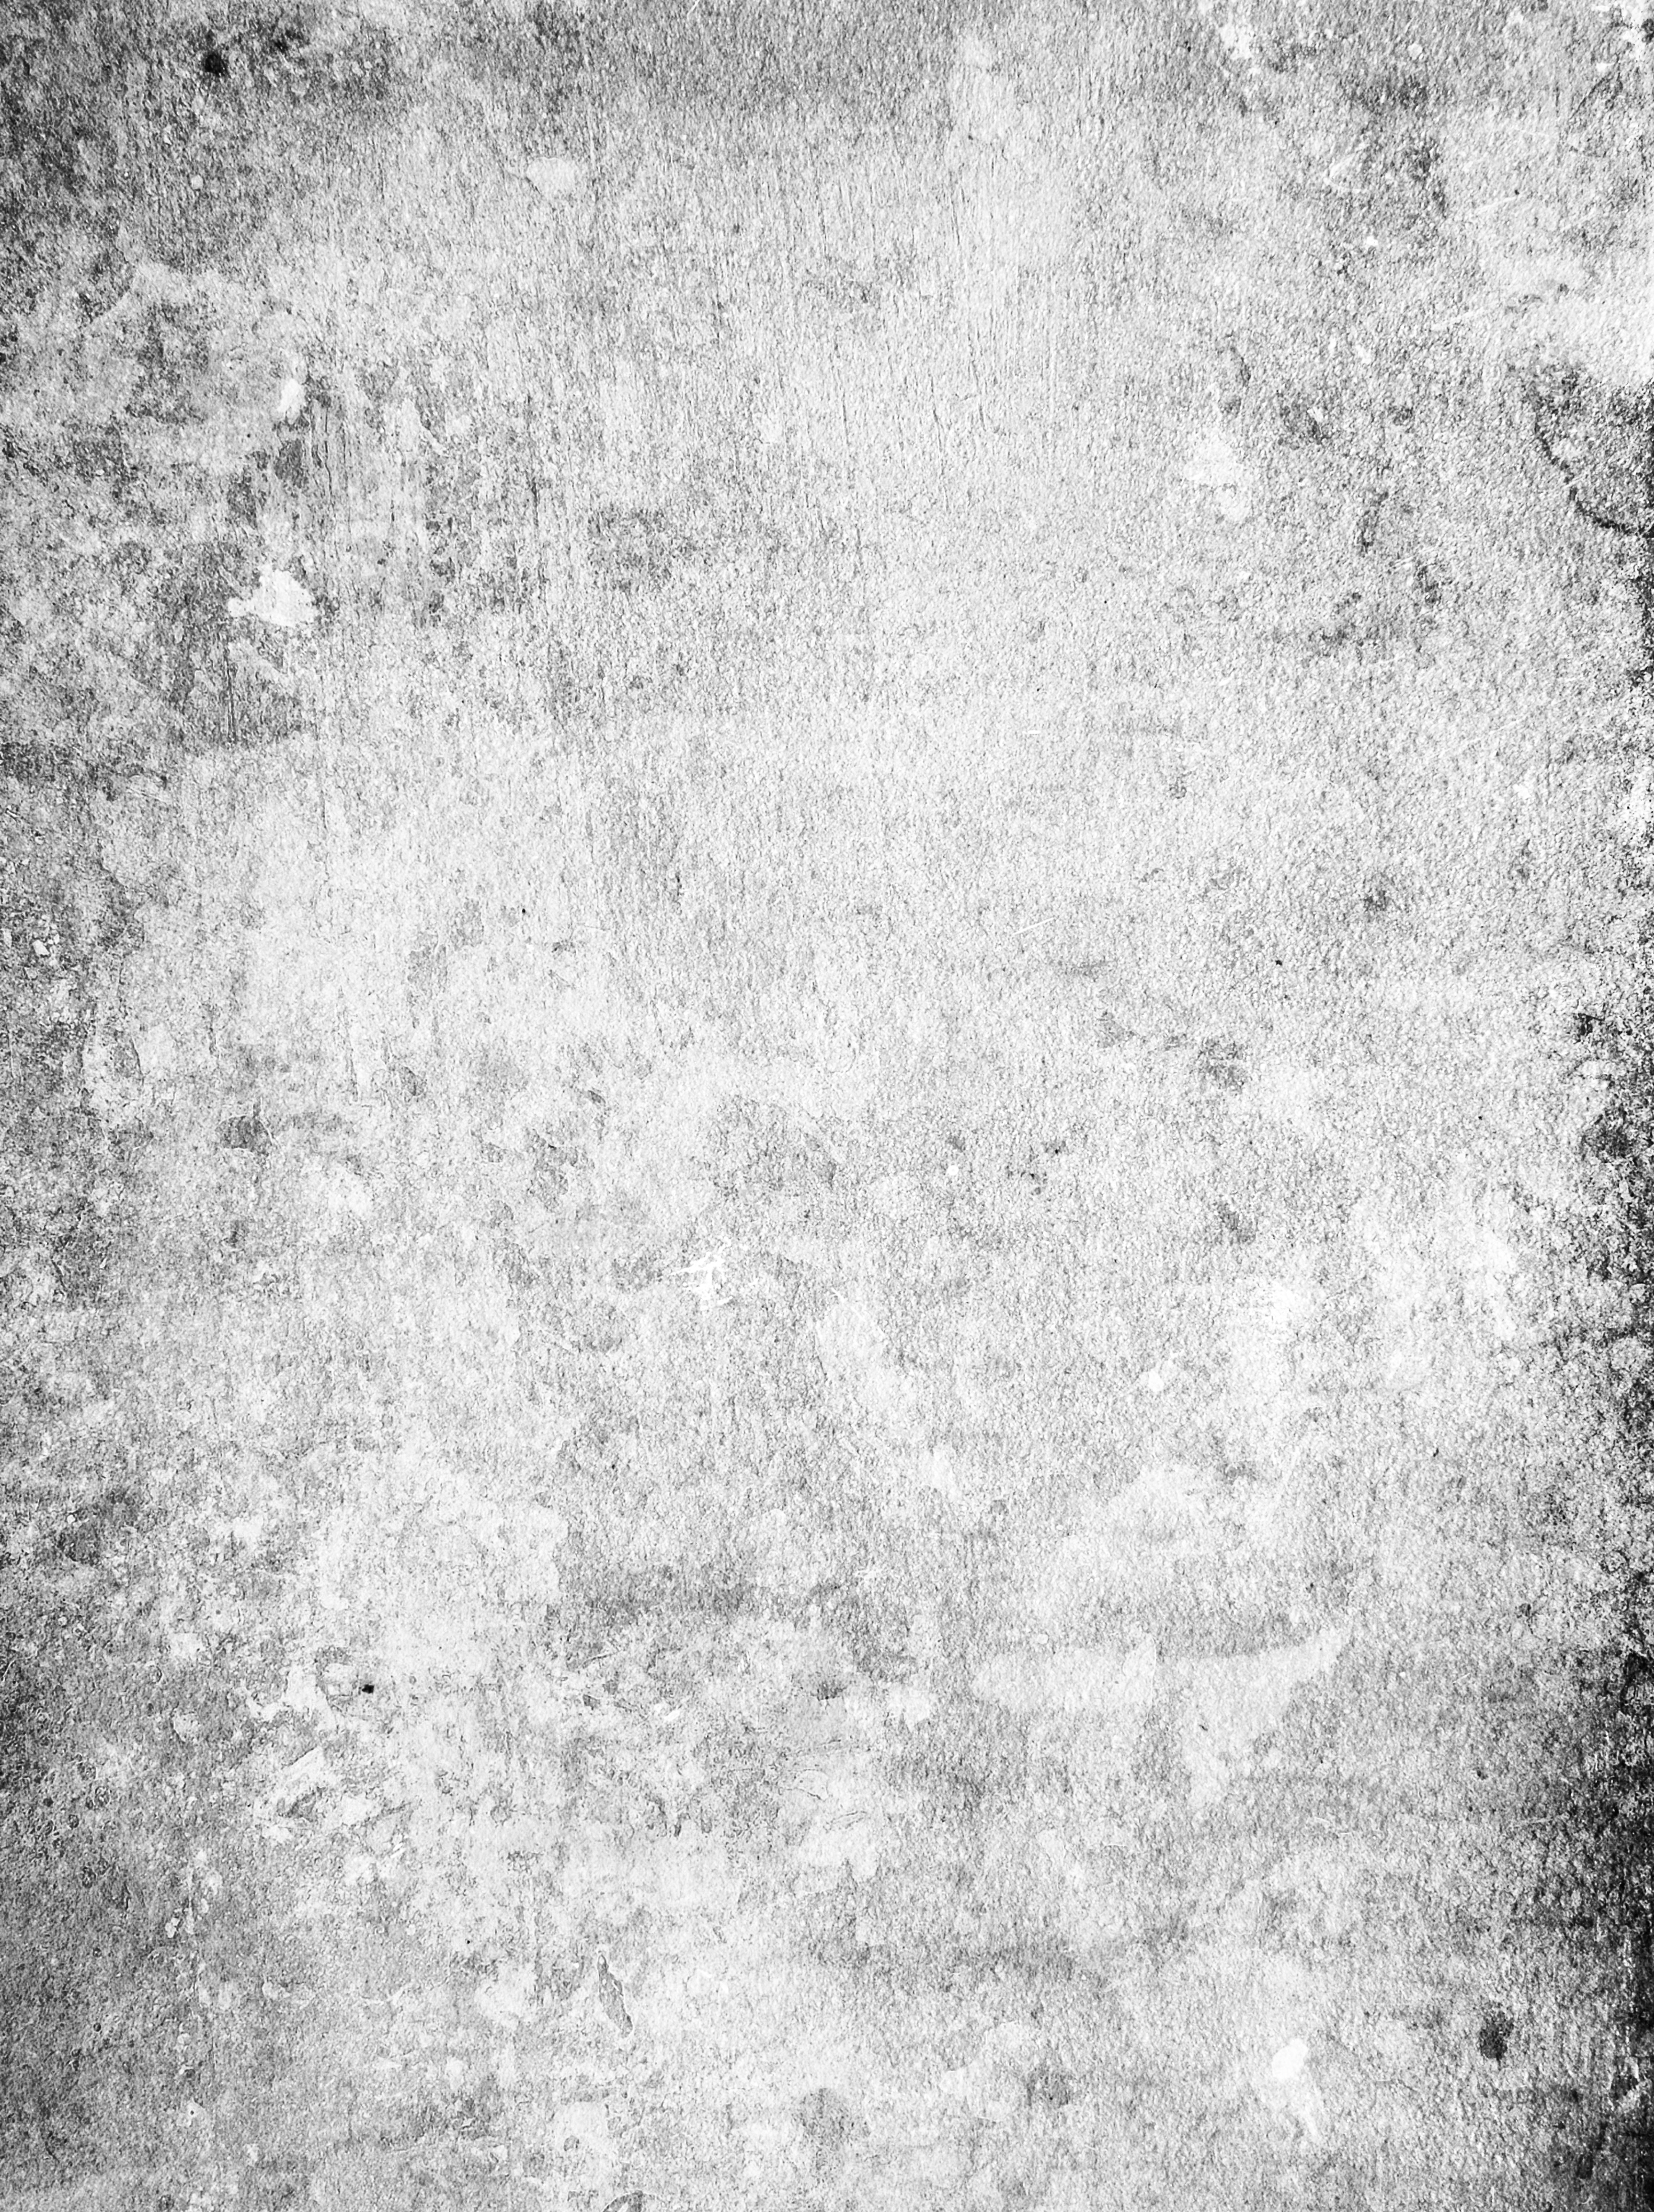 Free High Contrast Black And White Grunge Texture Texture - L+T